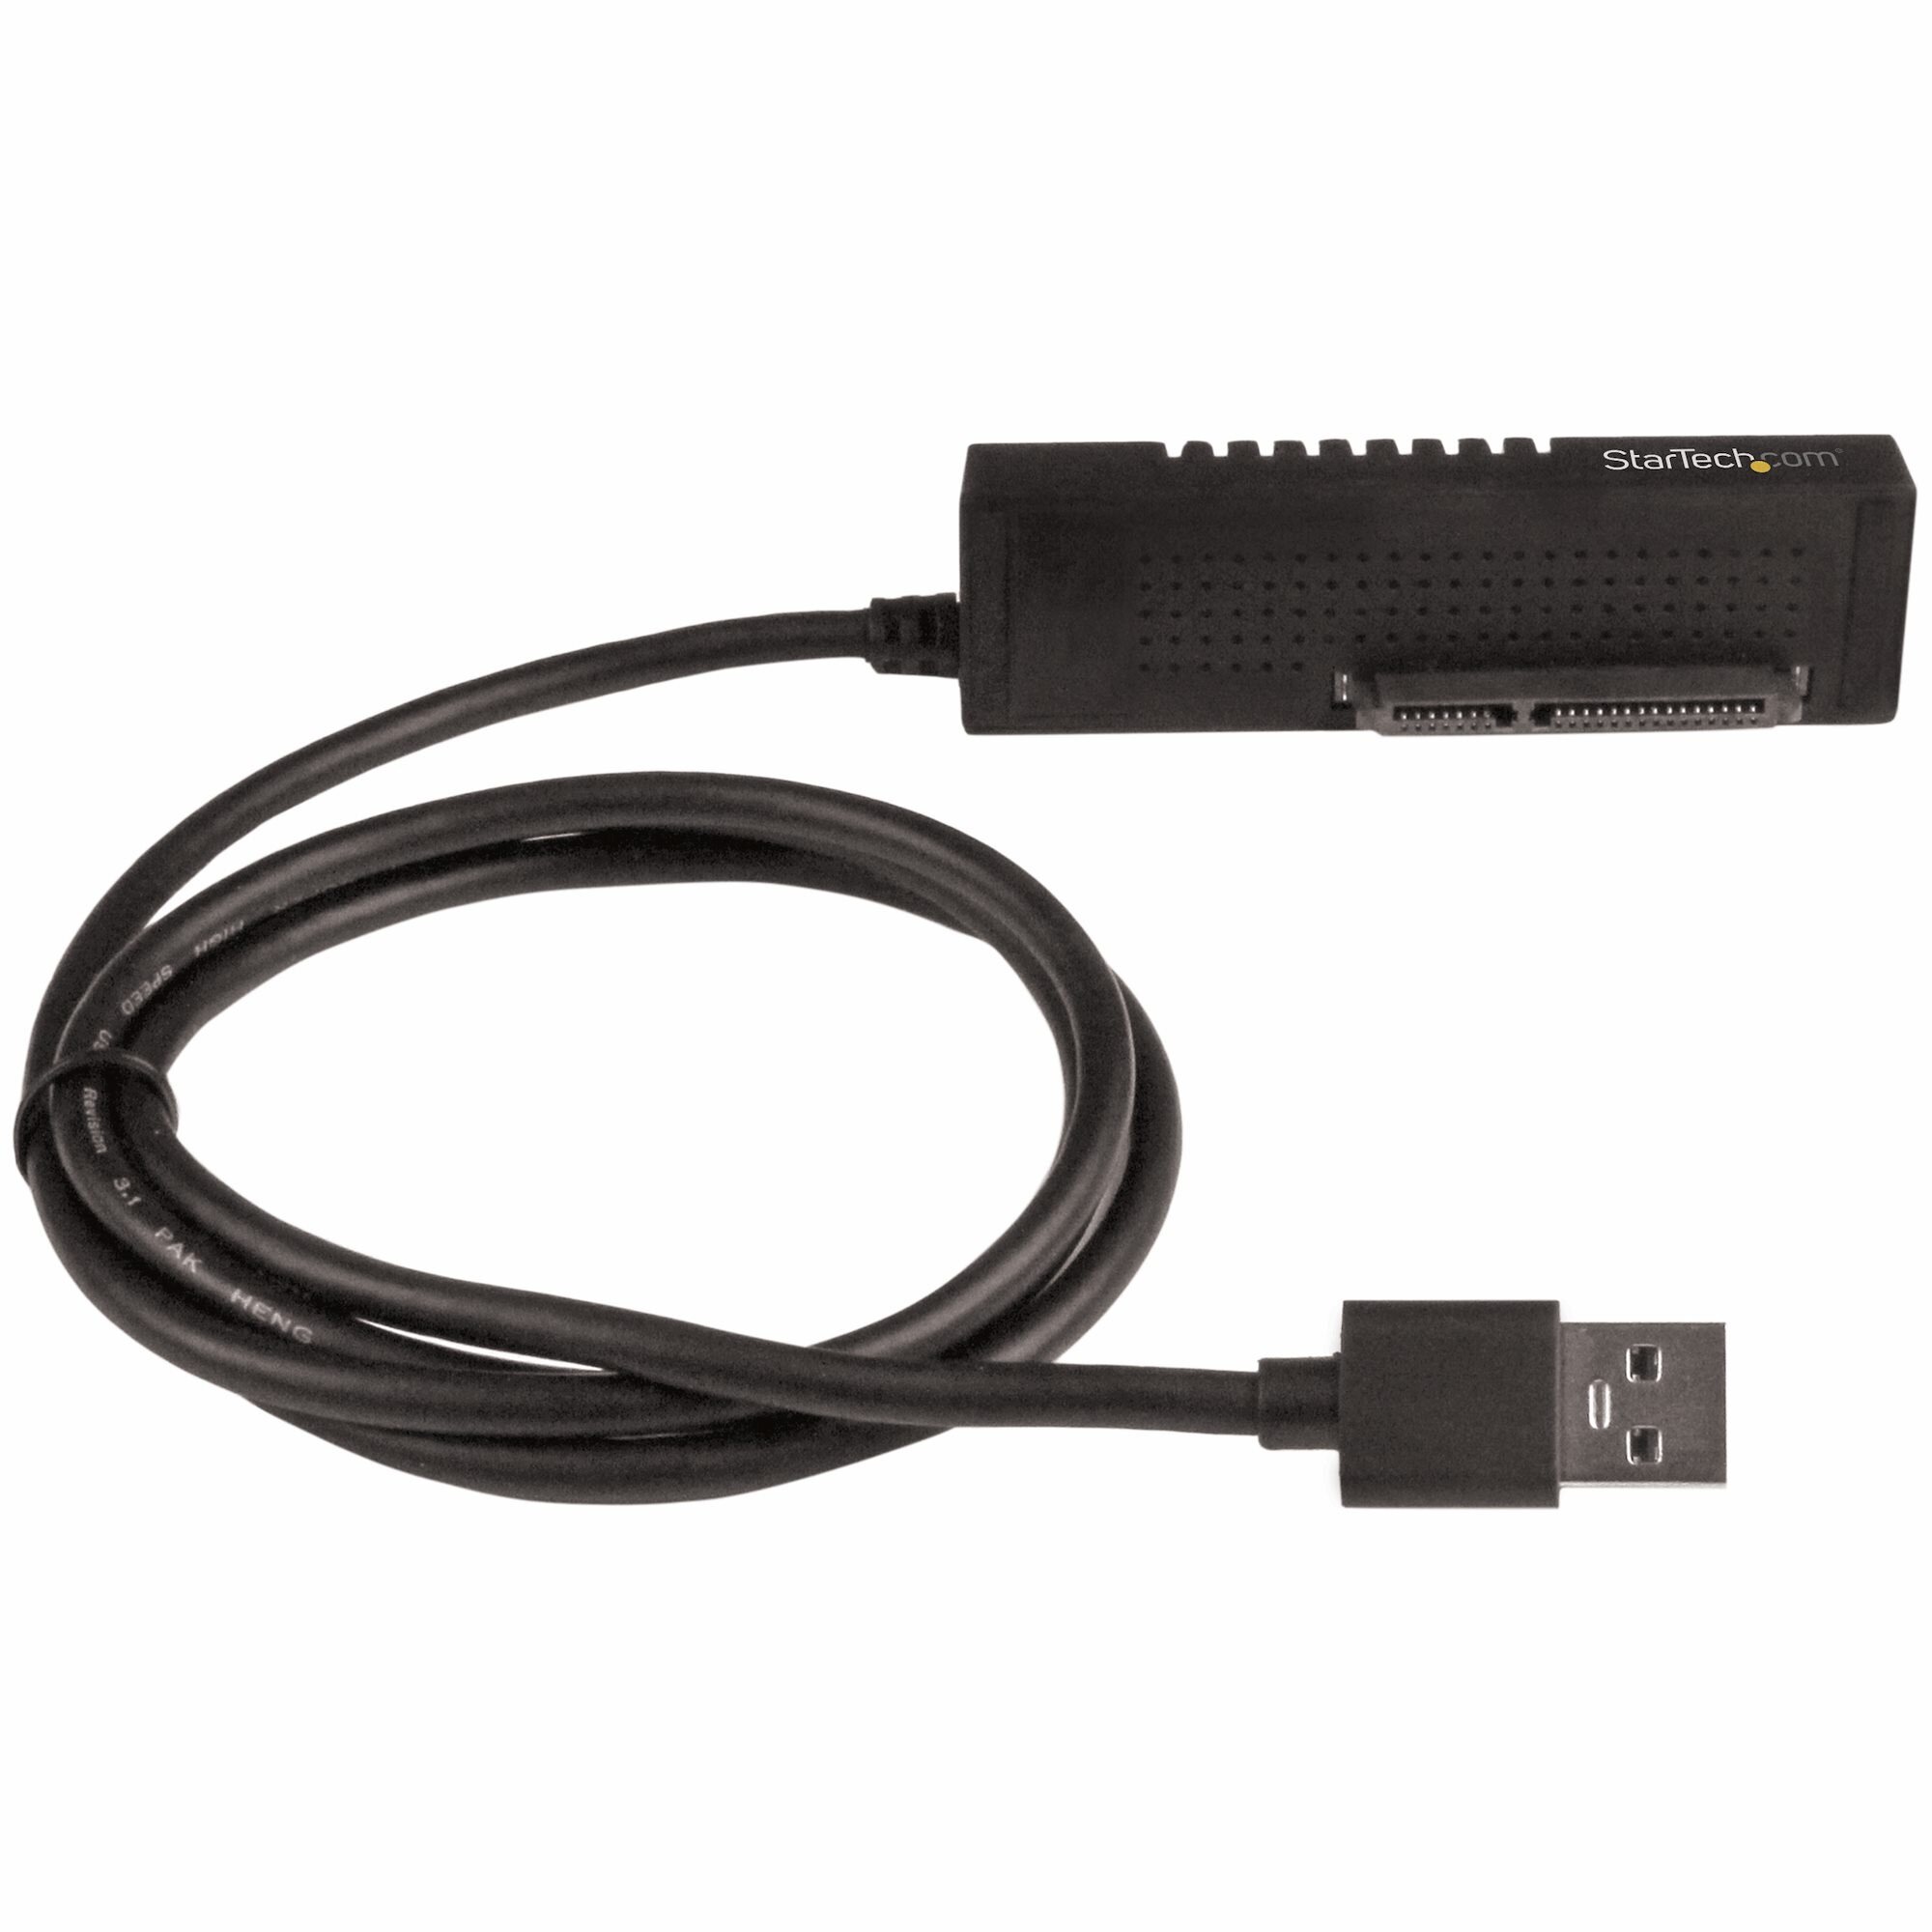 Buy Startech Sata To Usb Cable Usb Gbps Uasp Online In